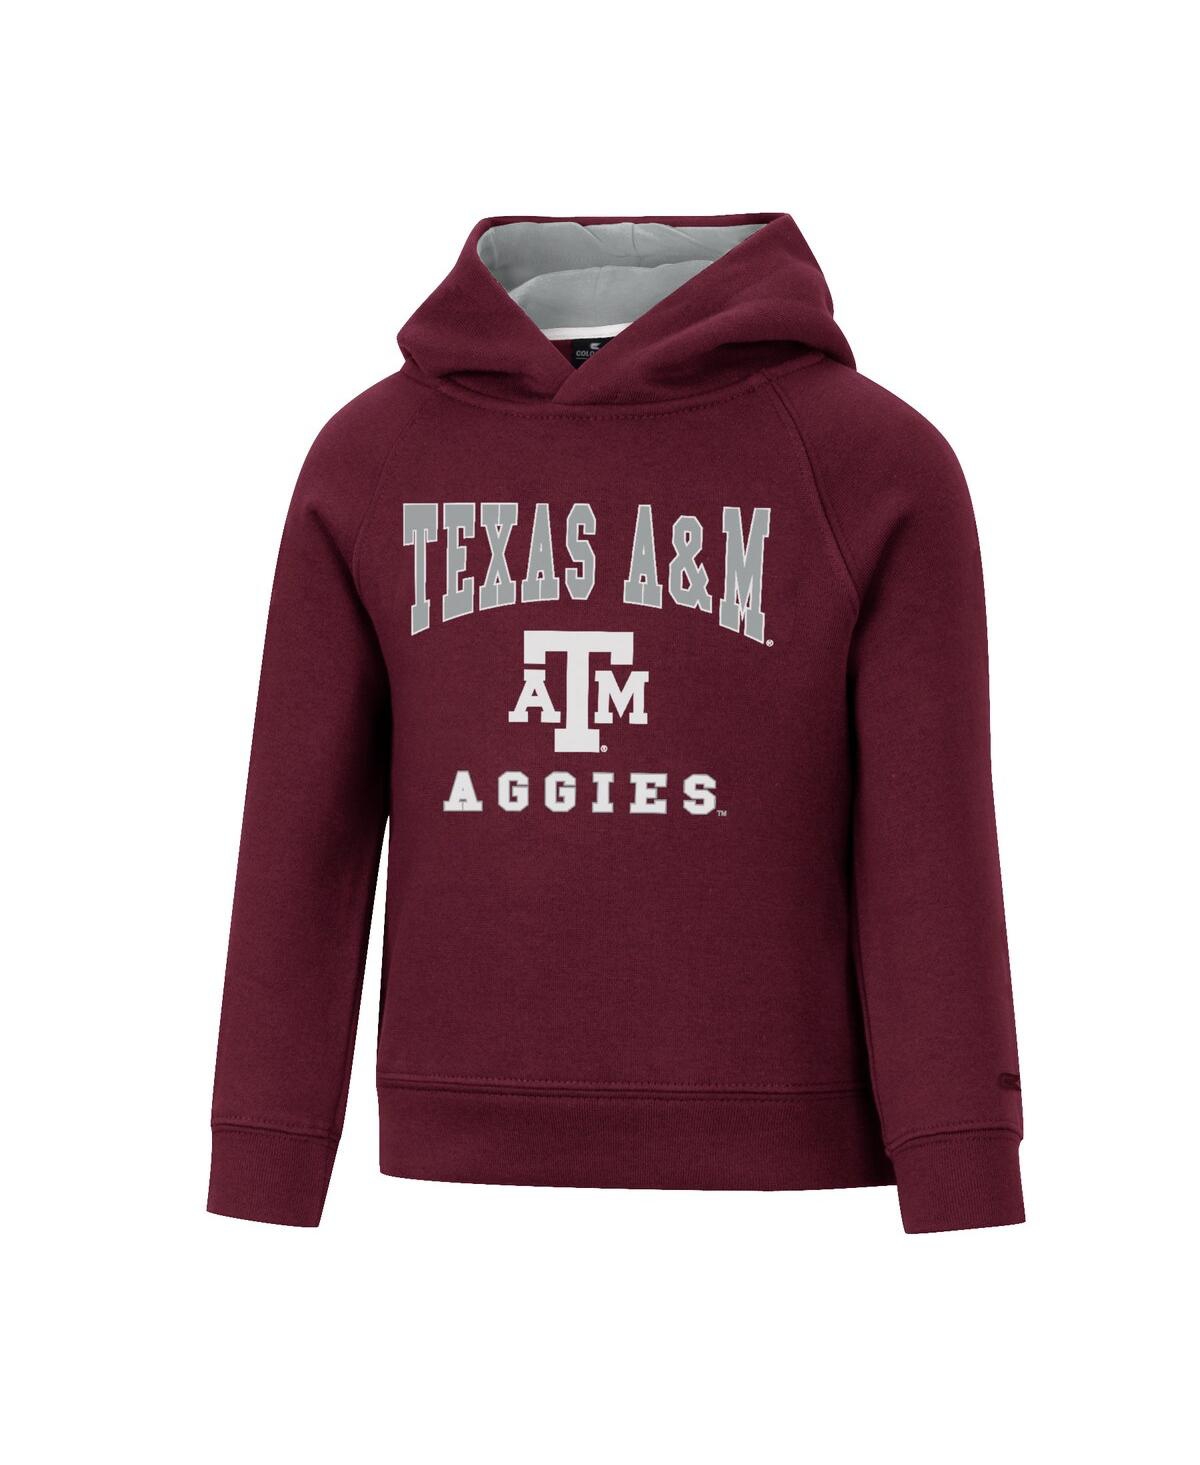 Colosseum Babies' Toddler Boys And Girls  Maroon Texas A&m Aggies Chimney Sweep Raglan Pullover Hoodie